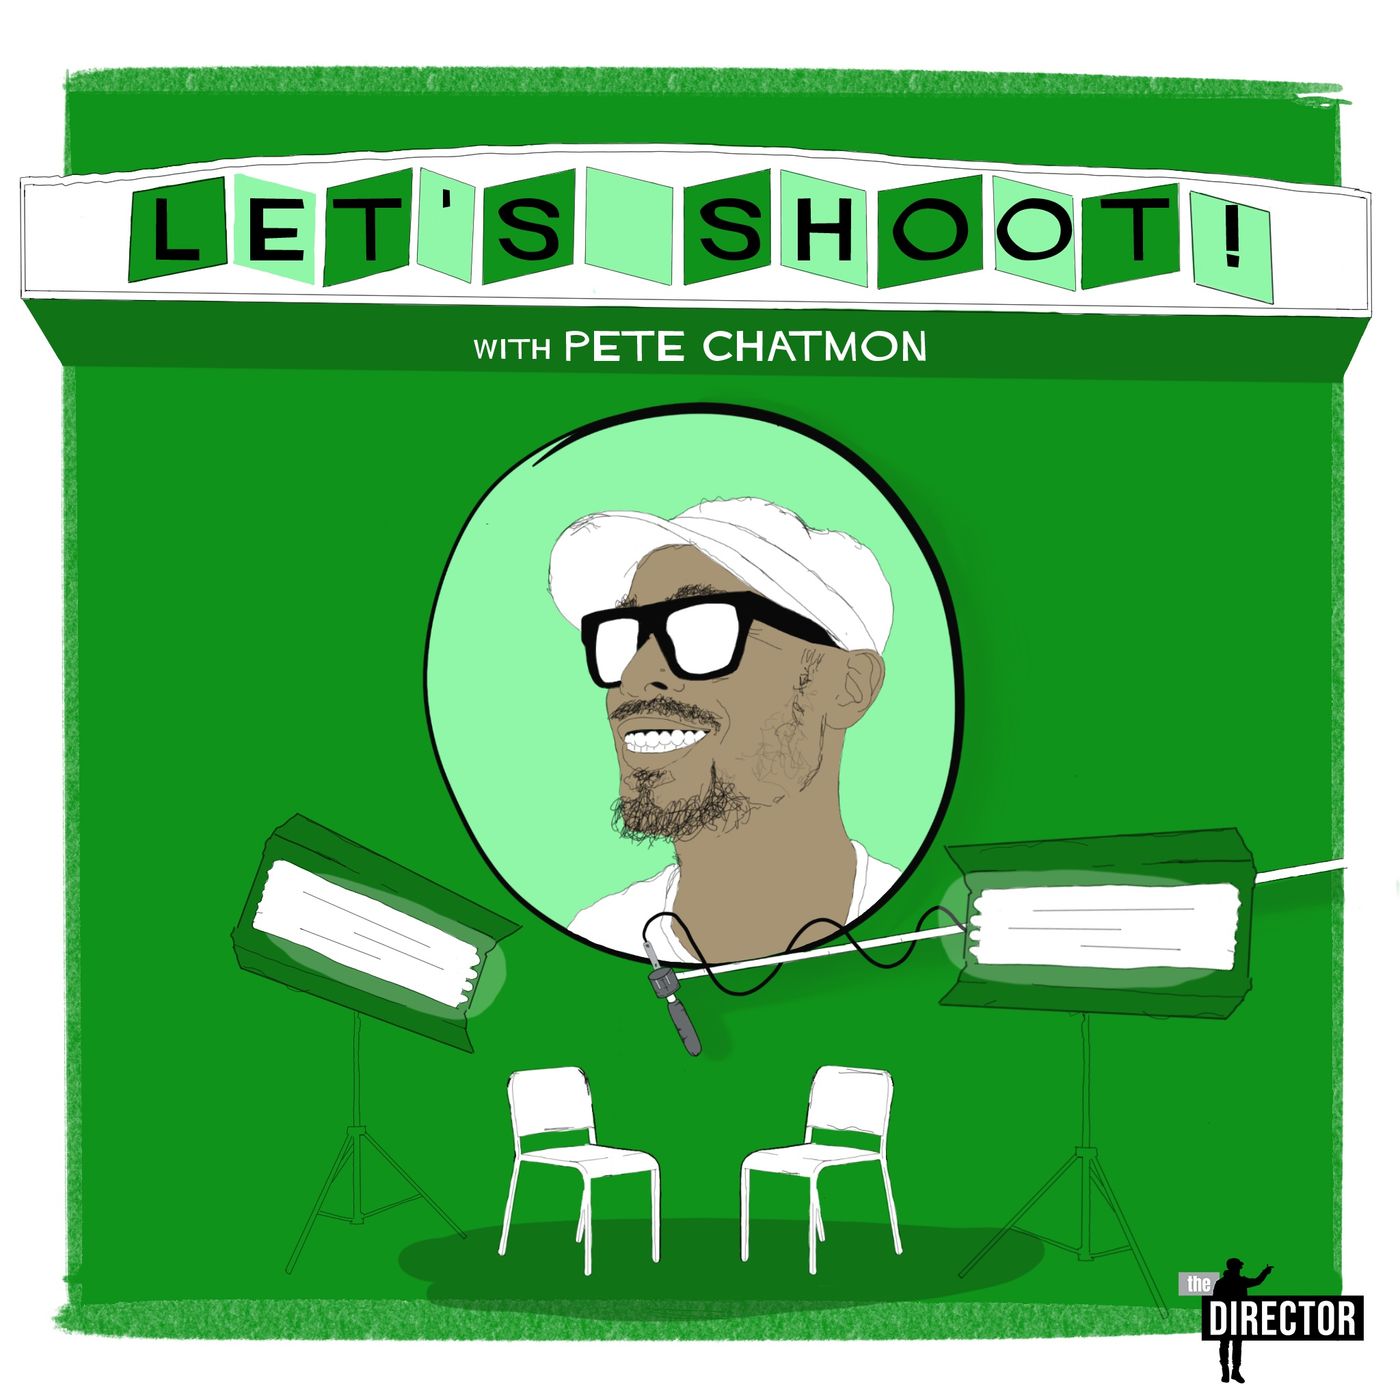 Let’s Shoot! with Pete Chatmon